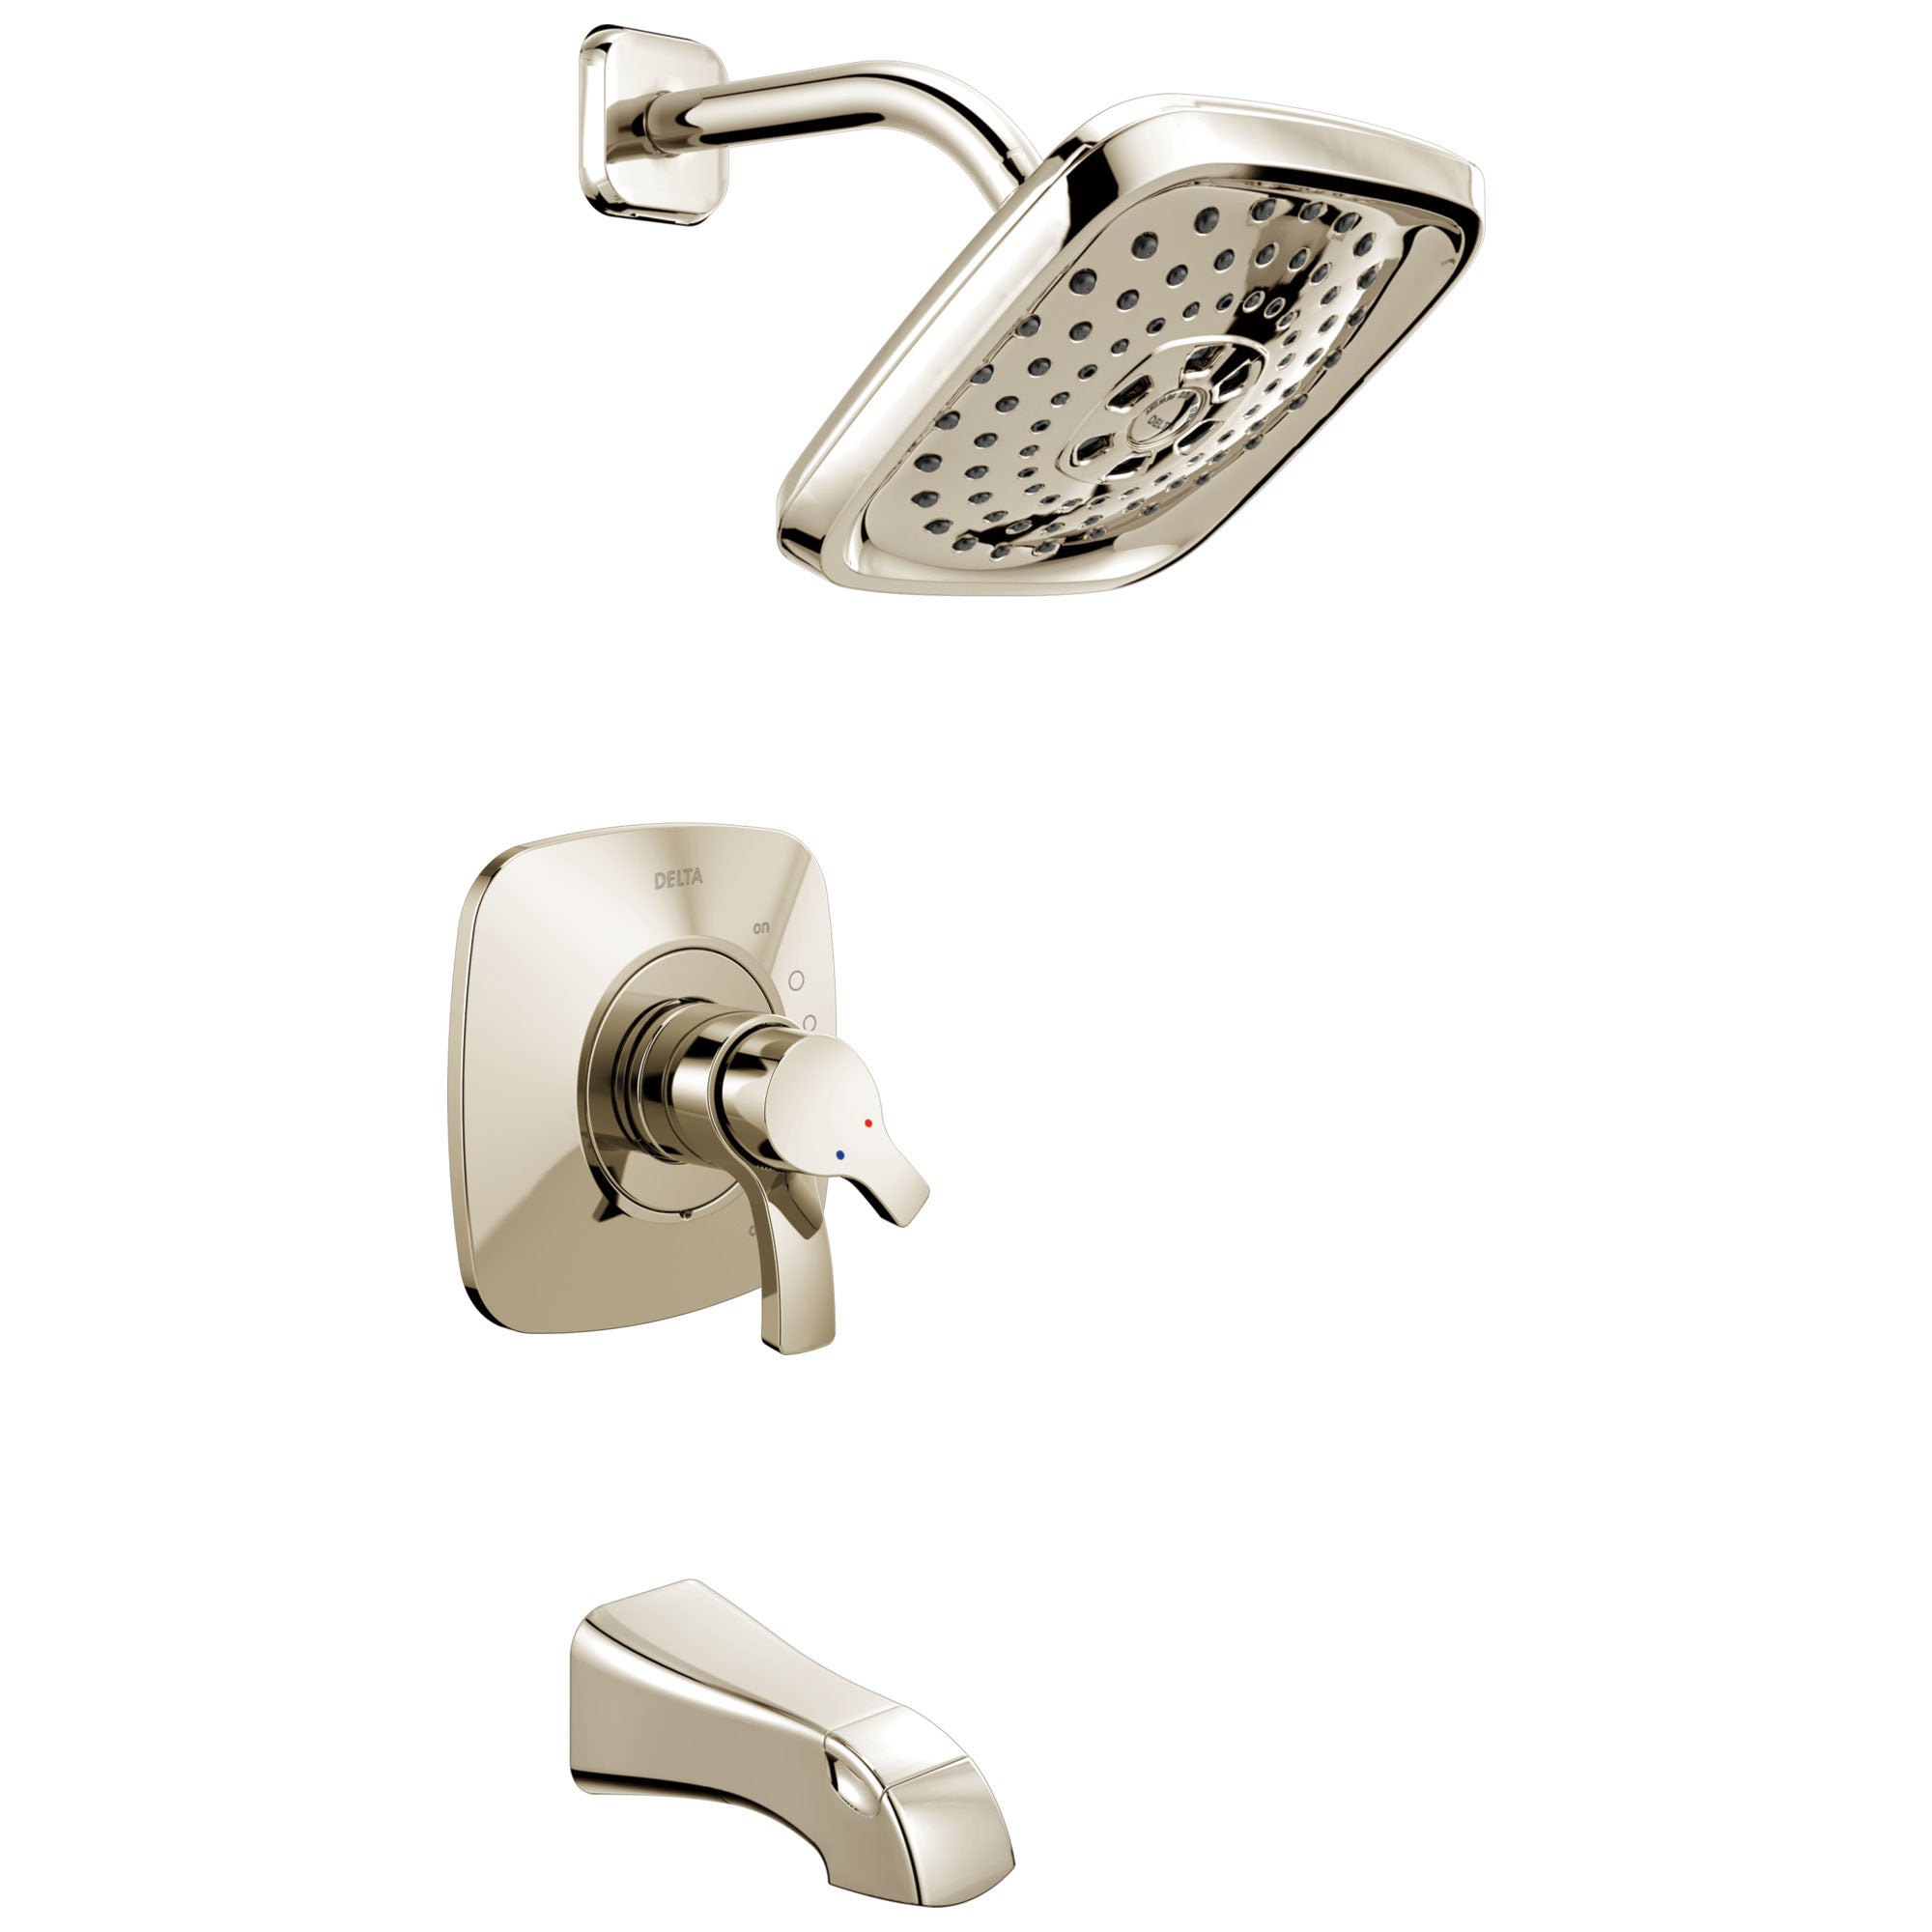 Delta Tesla Collection Polished Nickel Modern Dual Pressure and Temperature Control Tub and Shower Combination Faucet Includes Rough-in Valve with Stops D1963V